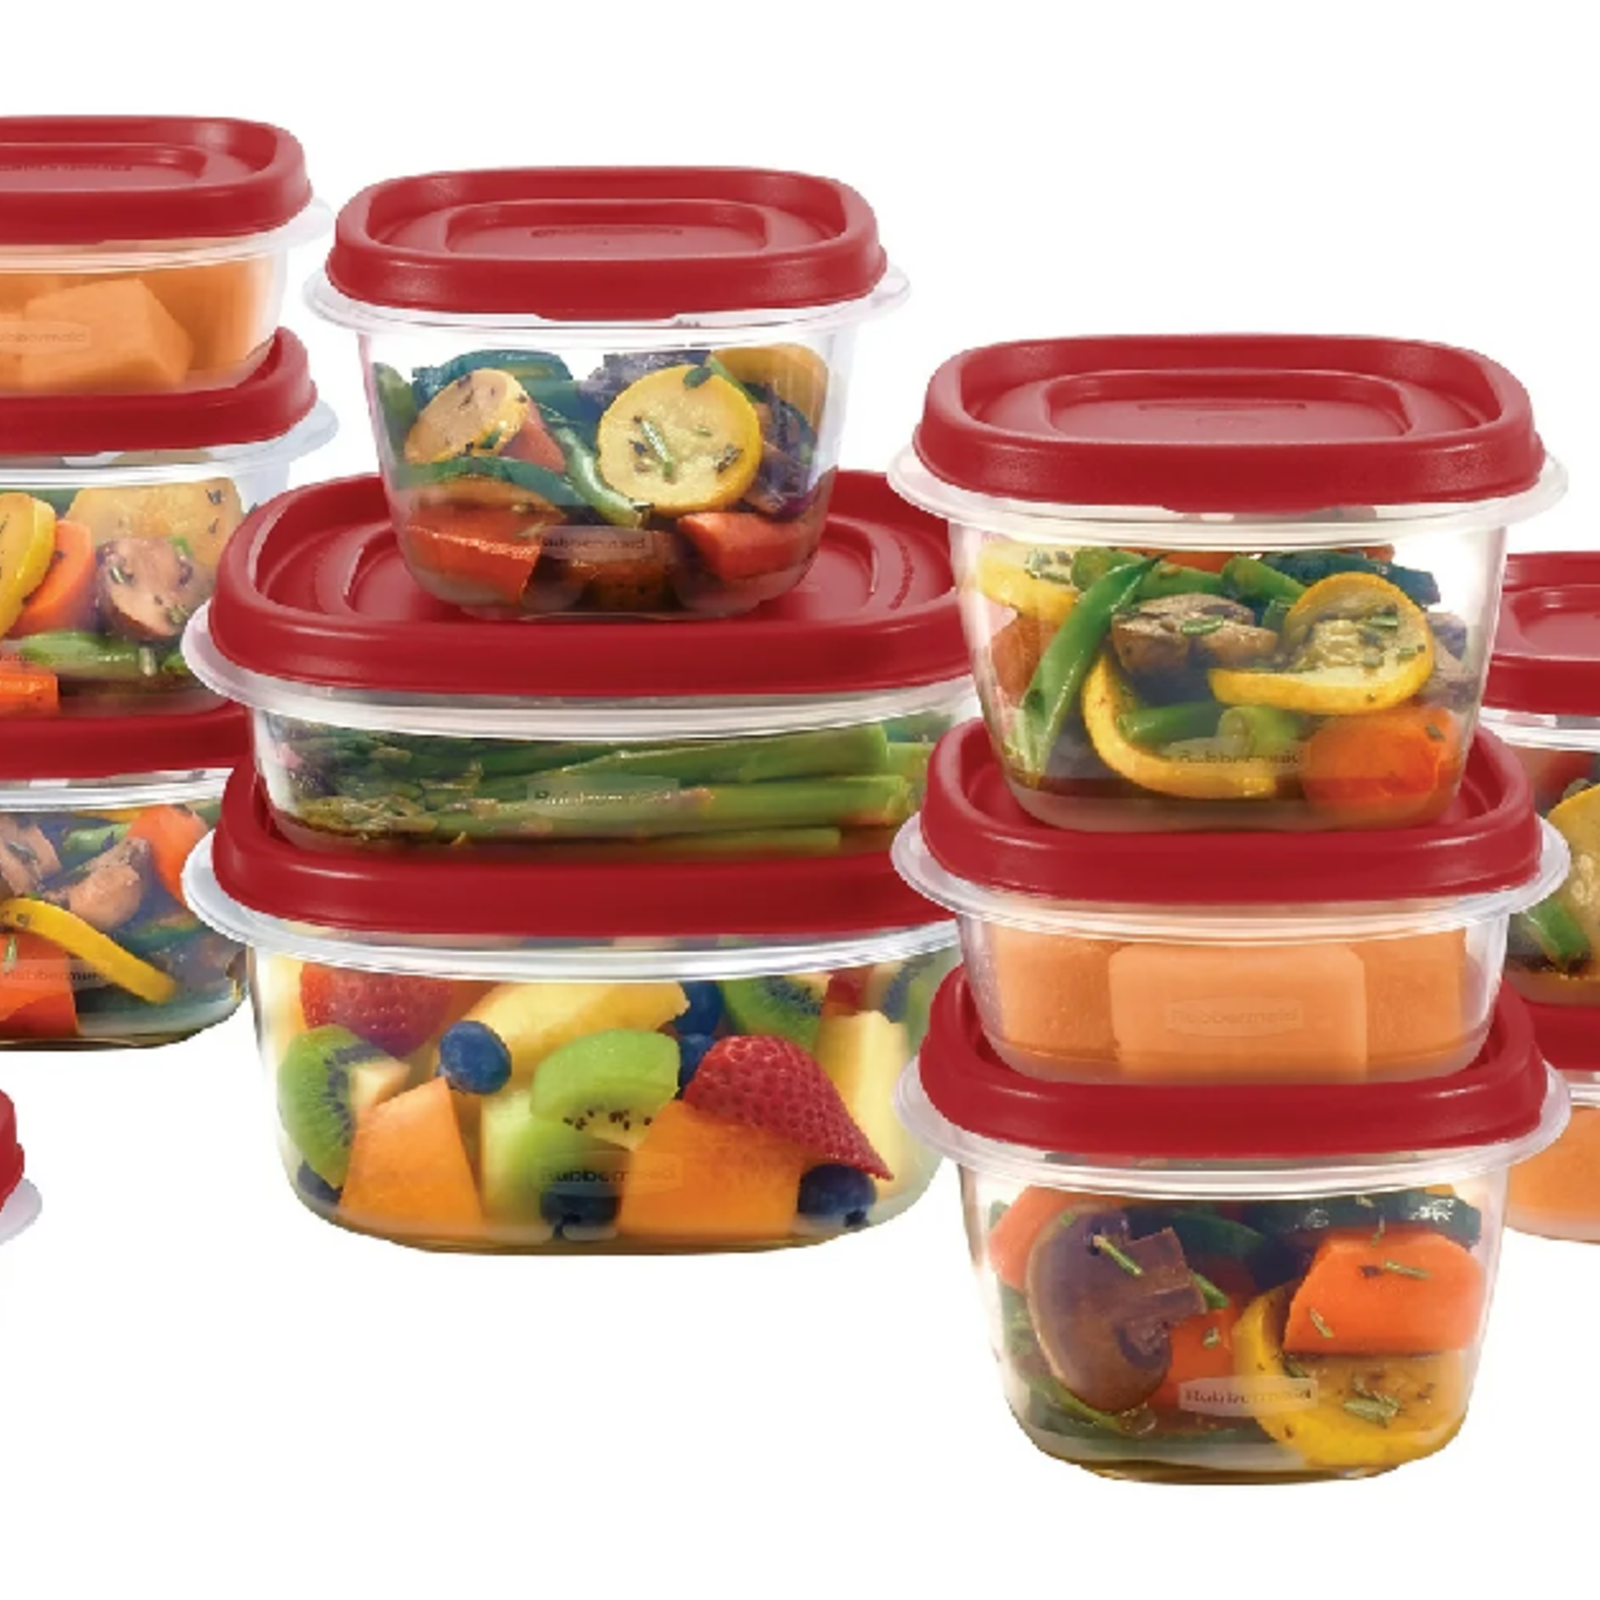 Prime Day 2020: Get this Rubbermaid food storage set for less